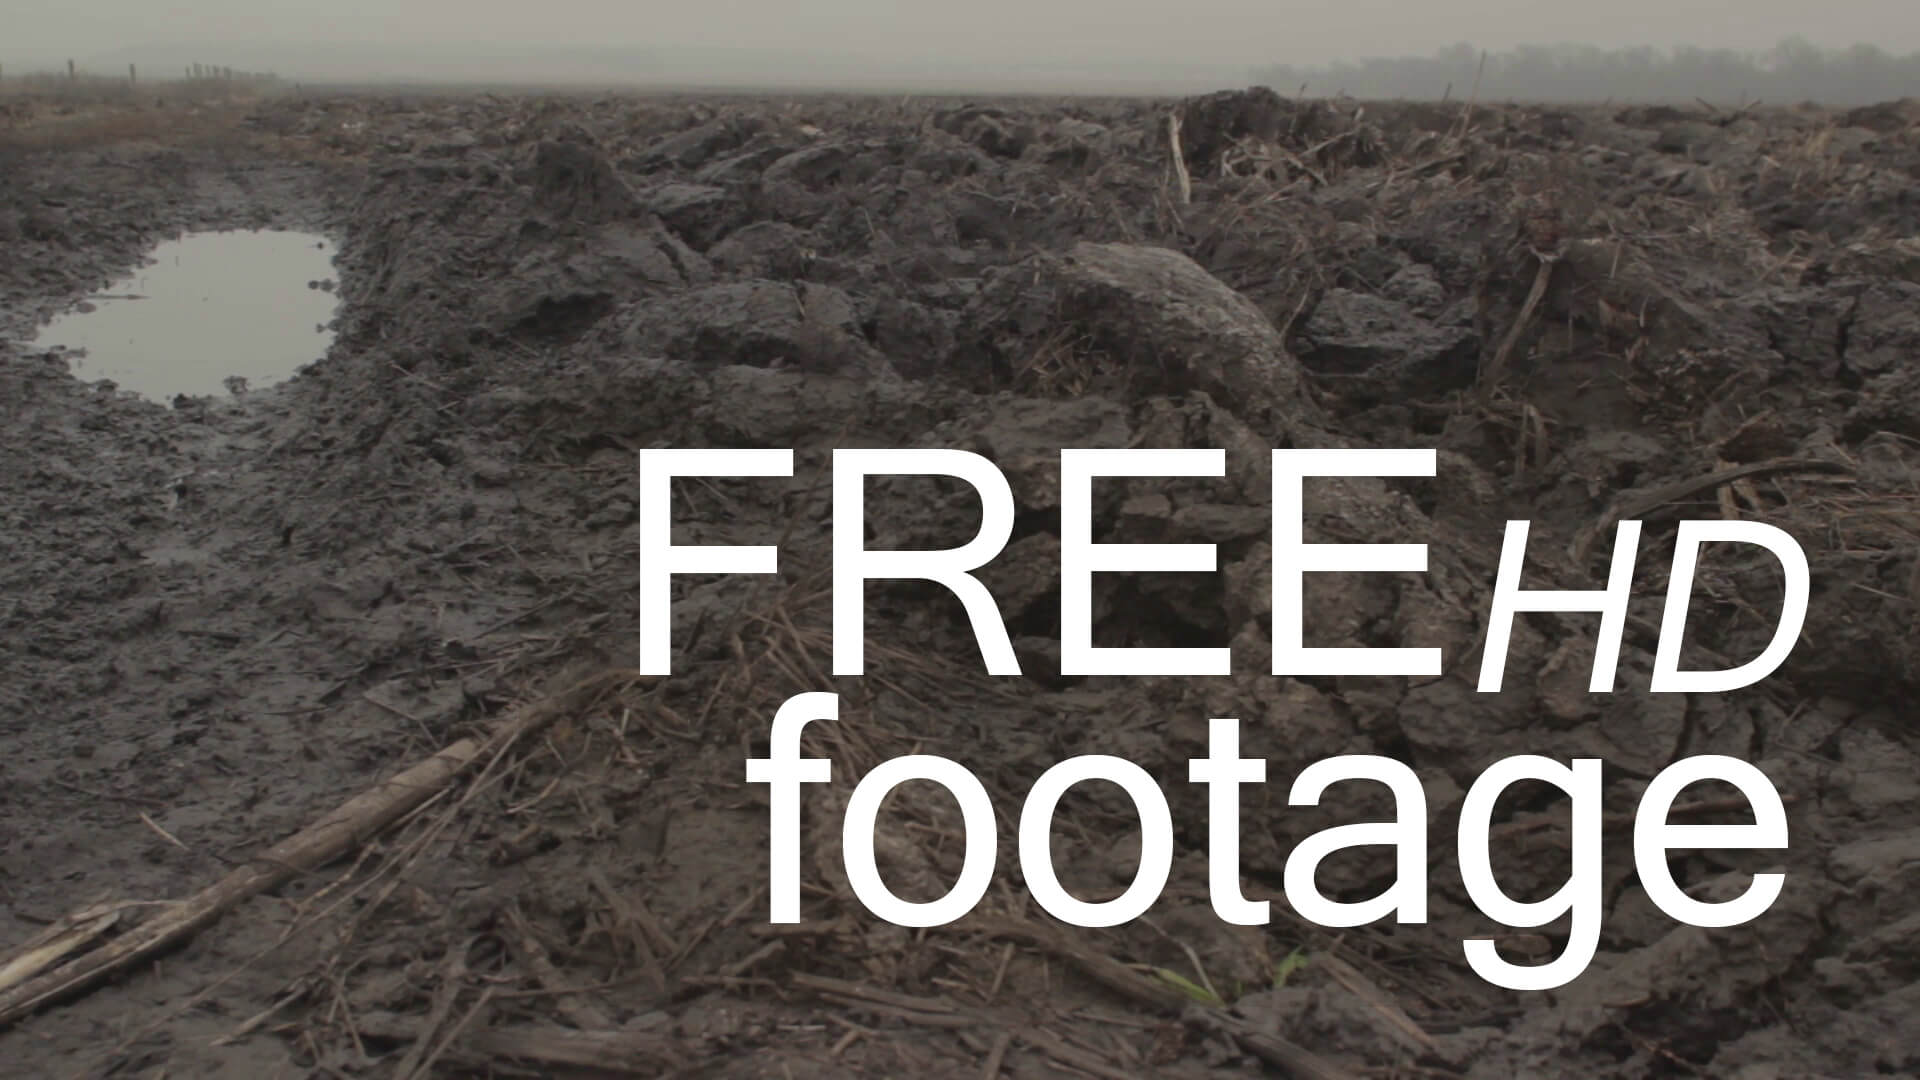 fog and field free hd footage d -